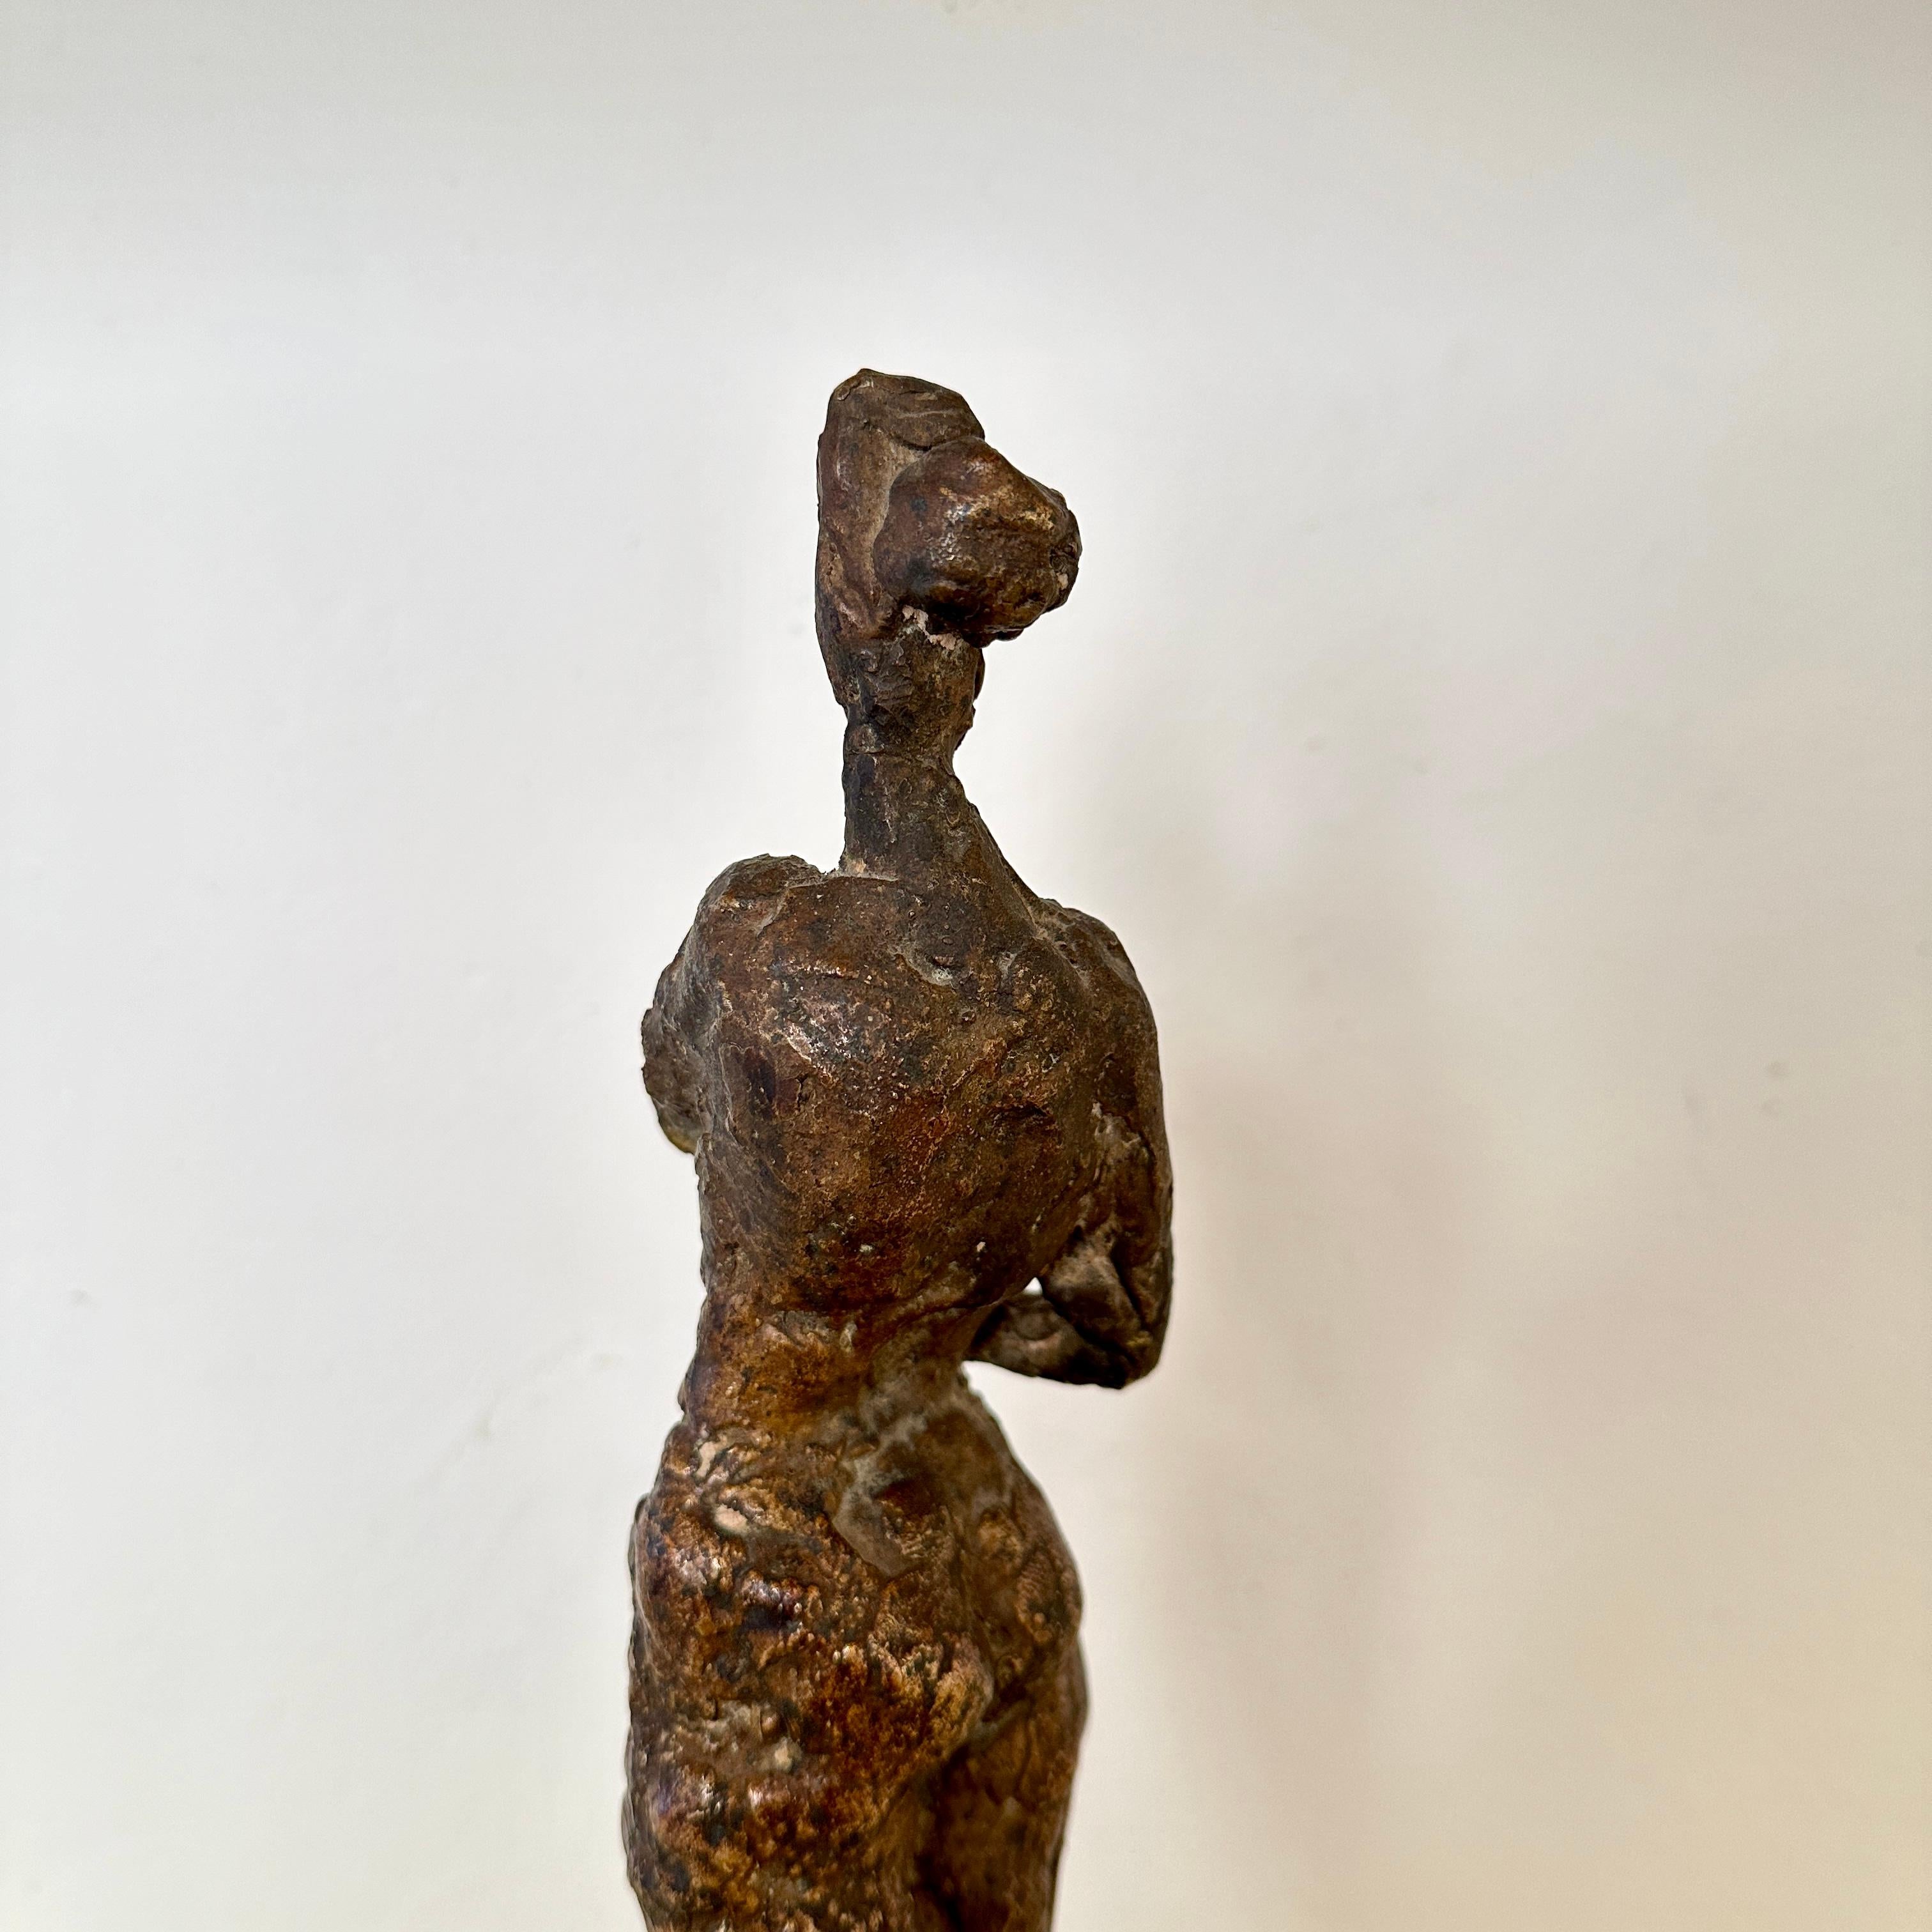 Small Cast Bronze Woman Sculpture by Oskar Bottoli on a Black Marble Stand, 1969 For Sale 5